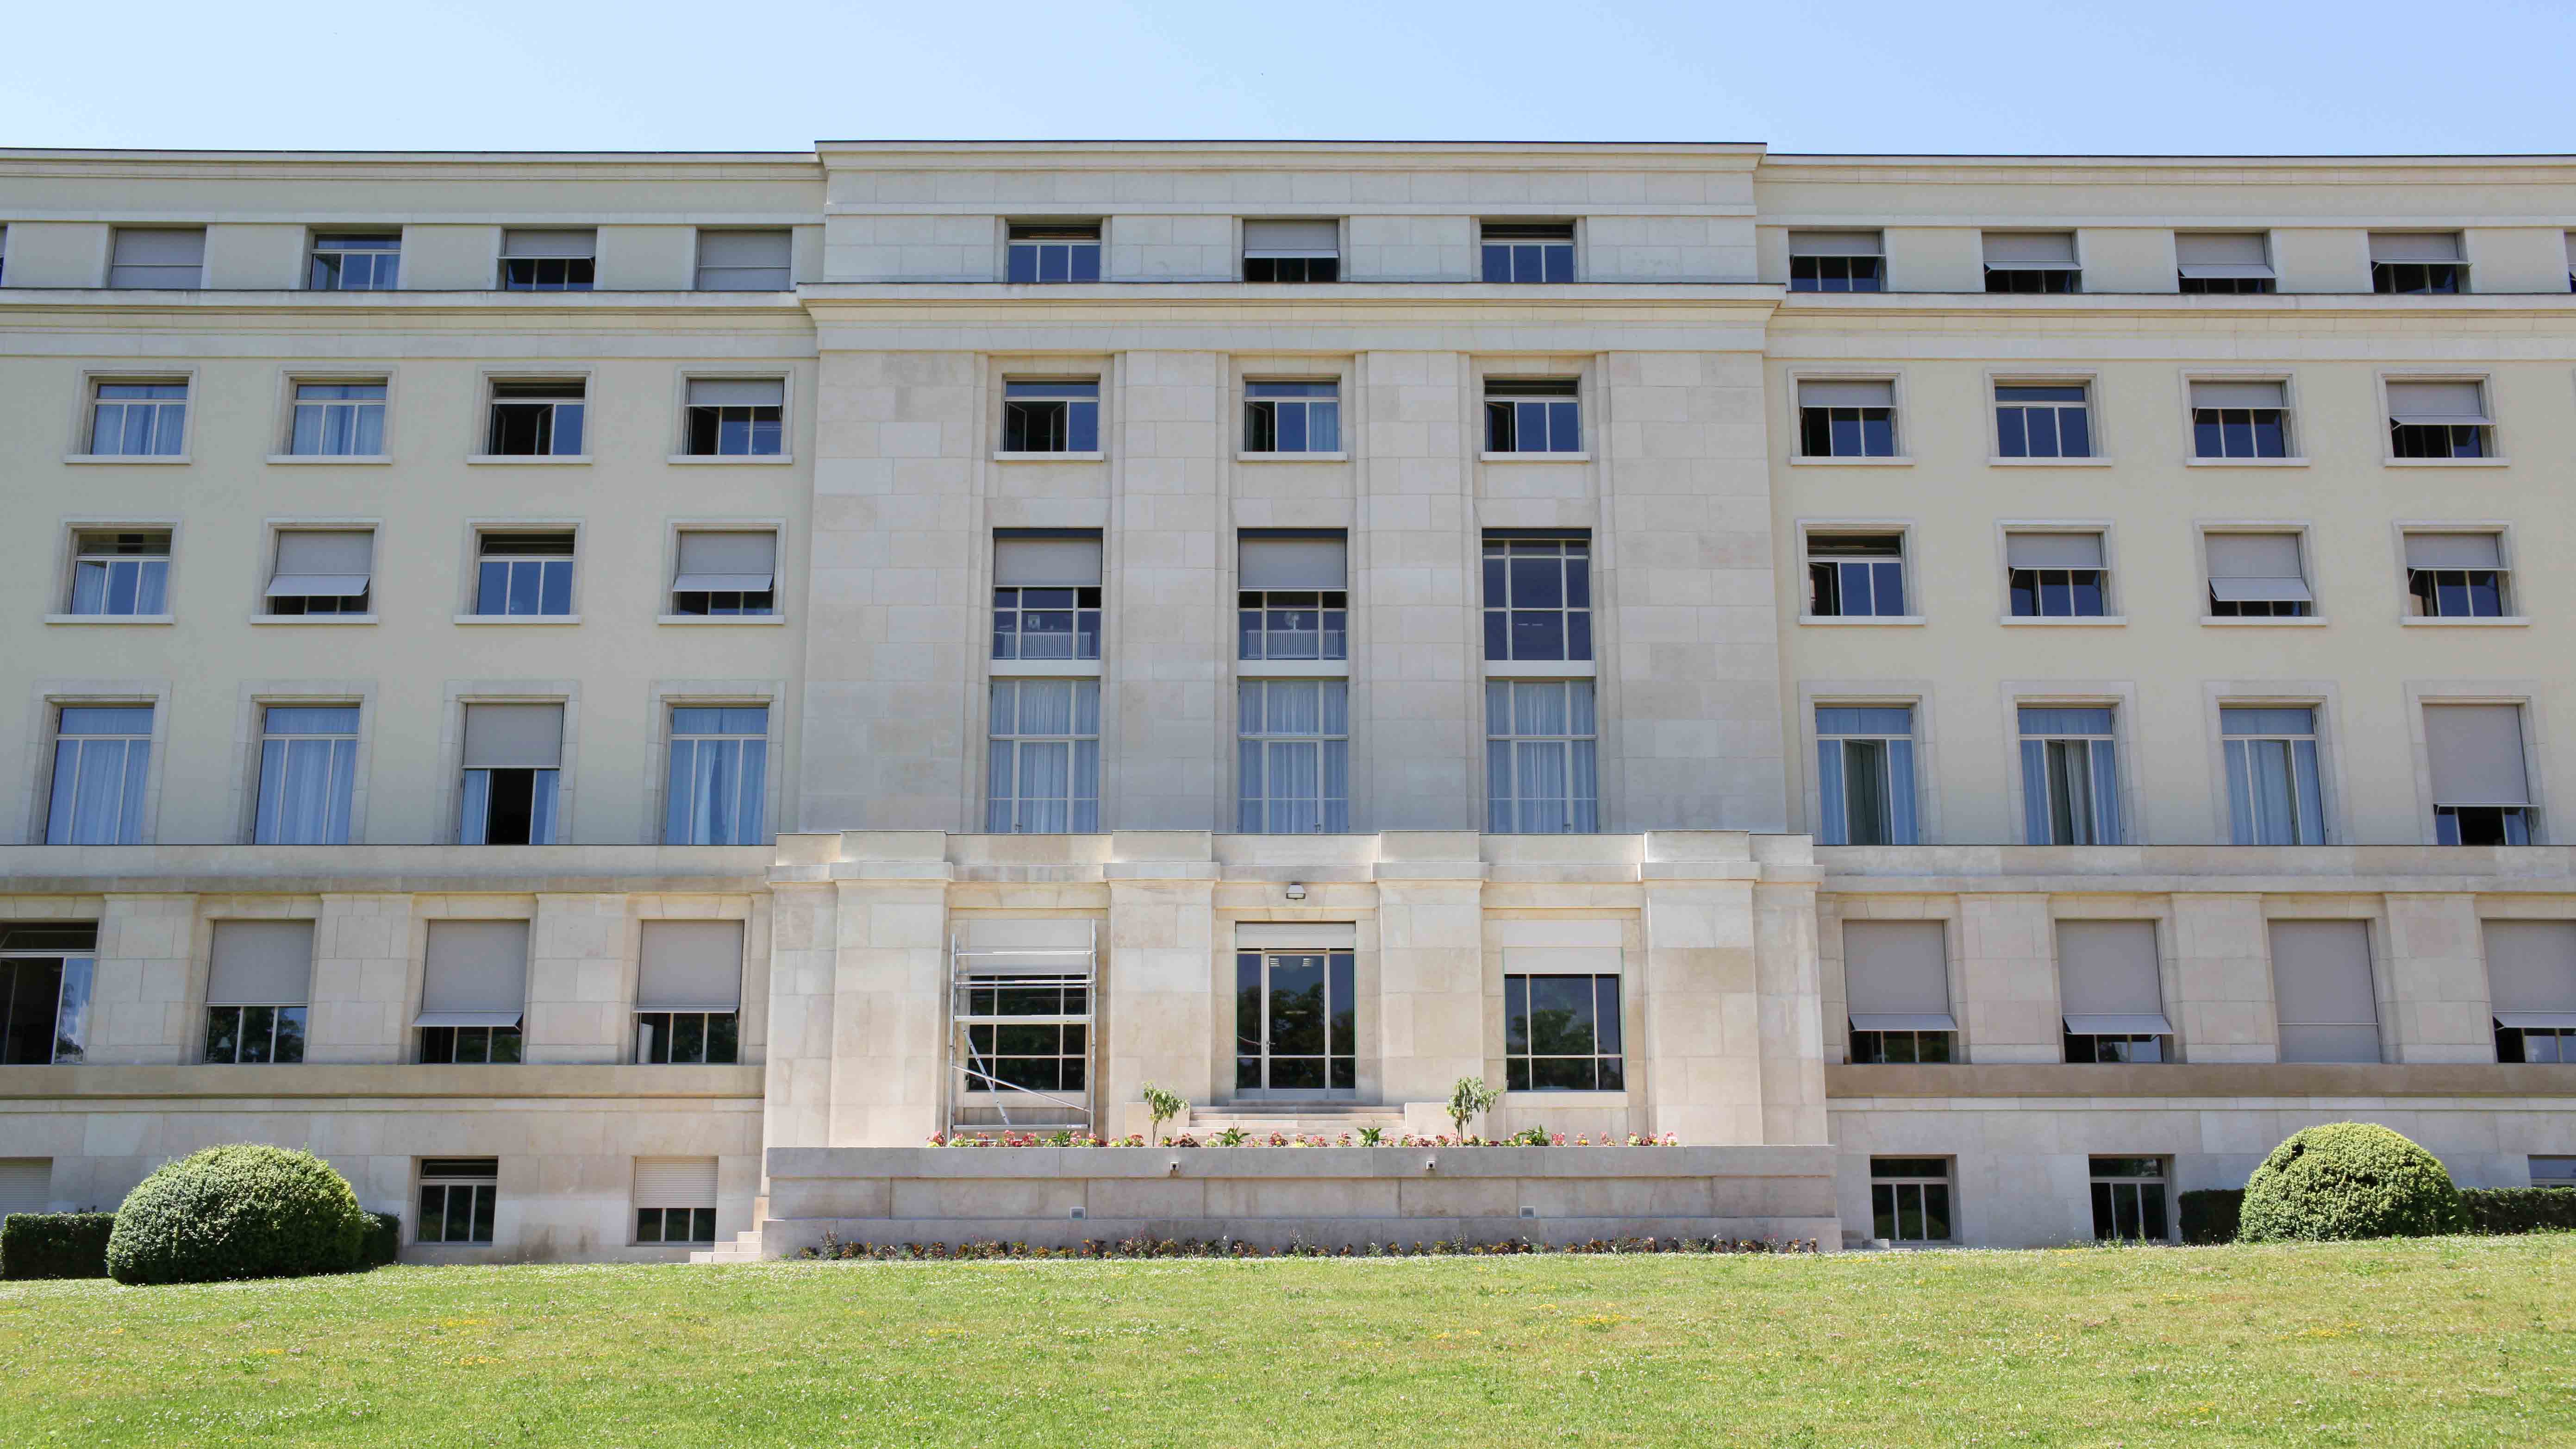 Palais des nations main with steel glazed windows